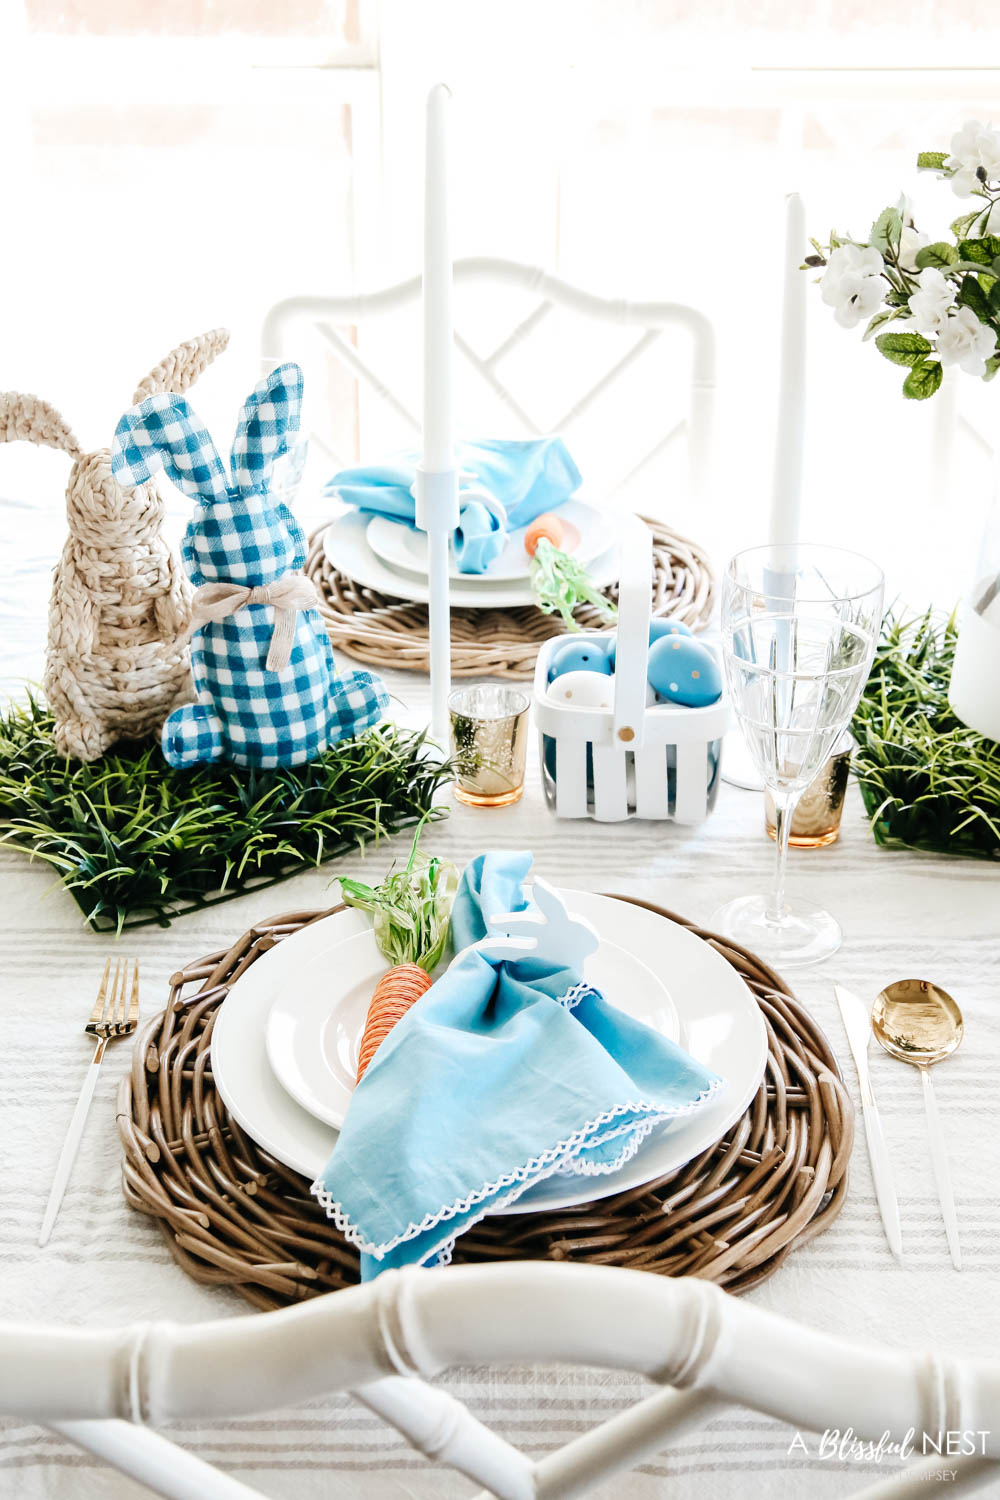 Basket weave placemat with white plates, a blue napkin tucked into a white napkin ring and a jute carrot resting next to it on the plate